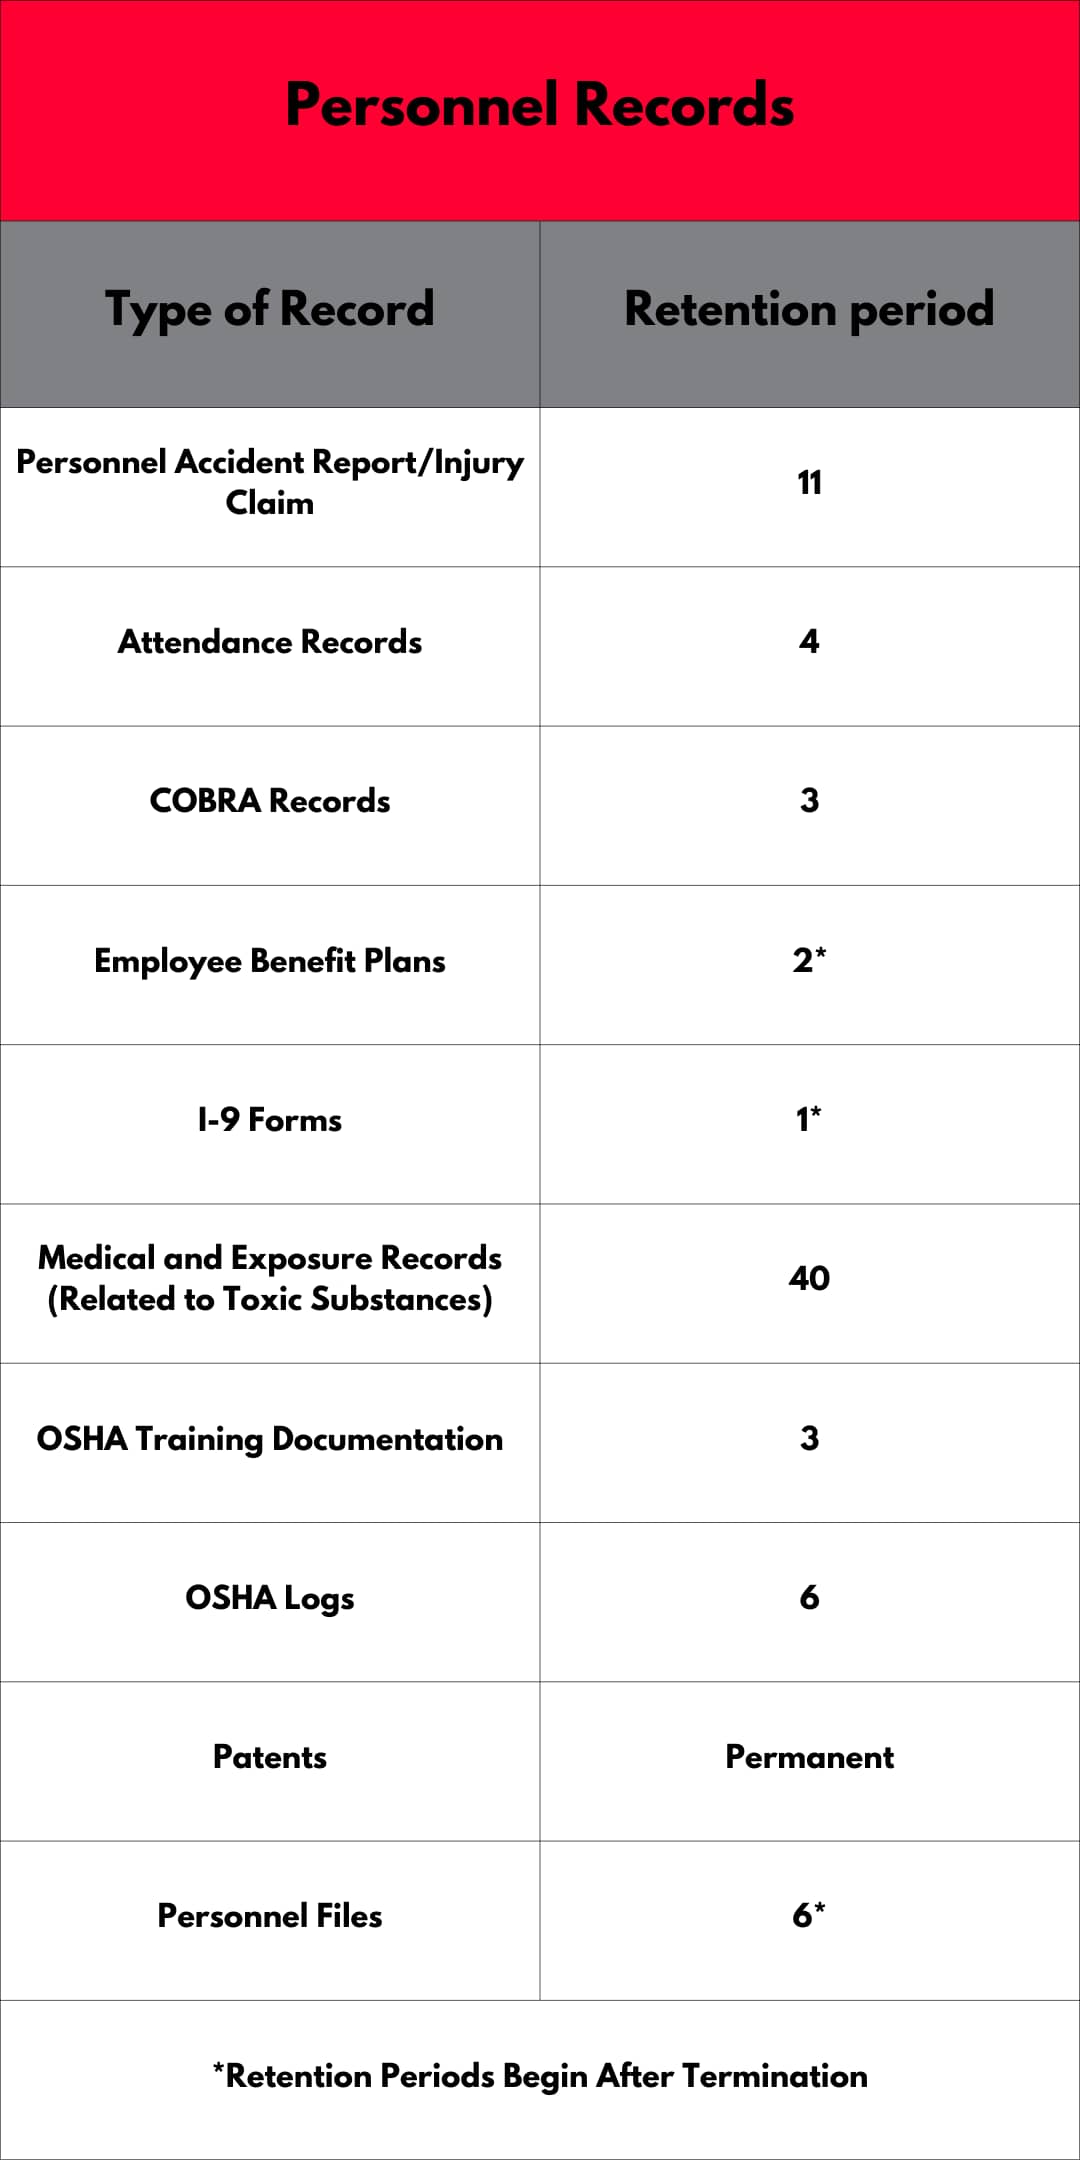 Business Record Retention Guidelines for Personnel Records

Types of Personnel Records

Retention Period (Years)

Personnel Accident Report/Injury Claim	11
Attendance Records	4
COBRA Records	3
Employee Benefit Plans	2*
I-9 Forms	1*
Medical and Exposure Records - related to toxic substances	40
OSHA Training Documentation	3
OSHA Logs	6
Patents	Permanent
Personnel files	6*

* Retention periods begin after termination,